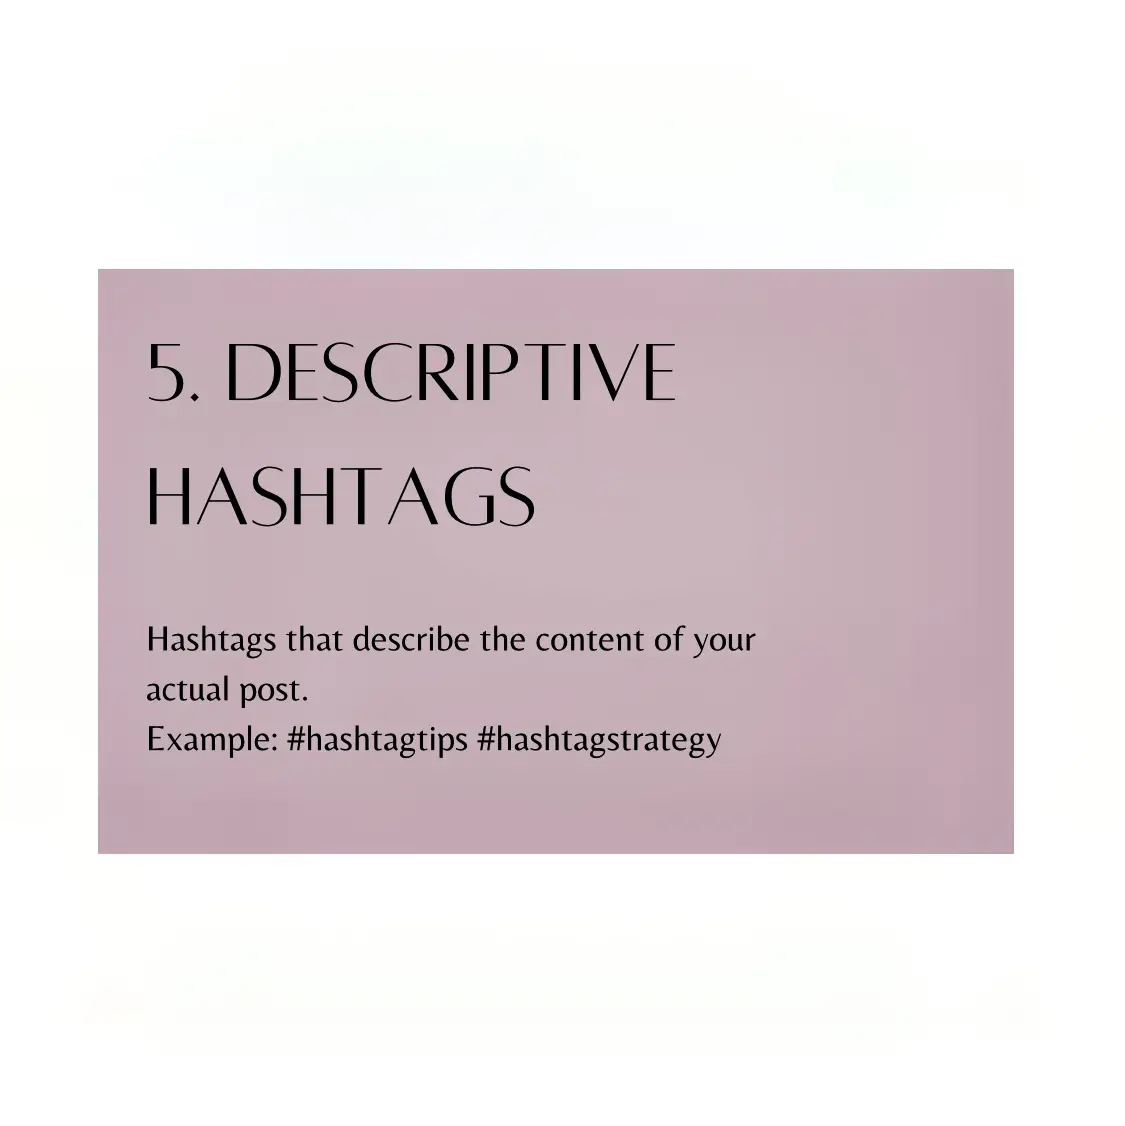  A white background with a green text that says "5. DESCRIPTIVE HASHTAGS".